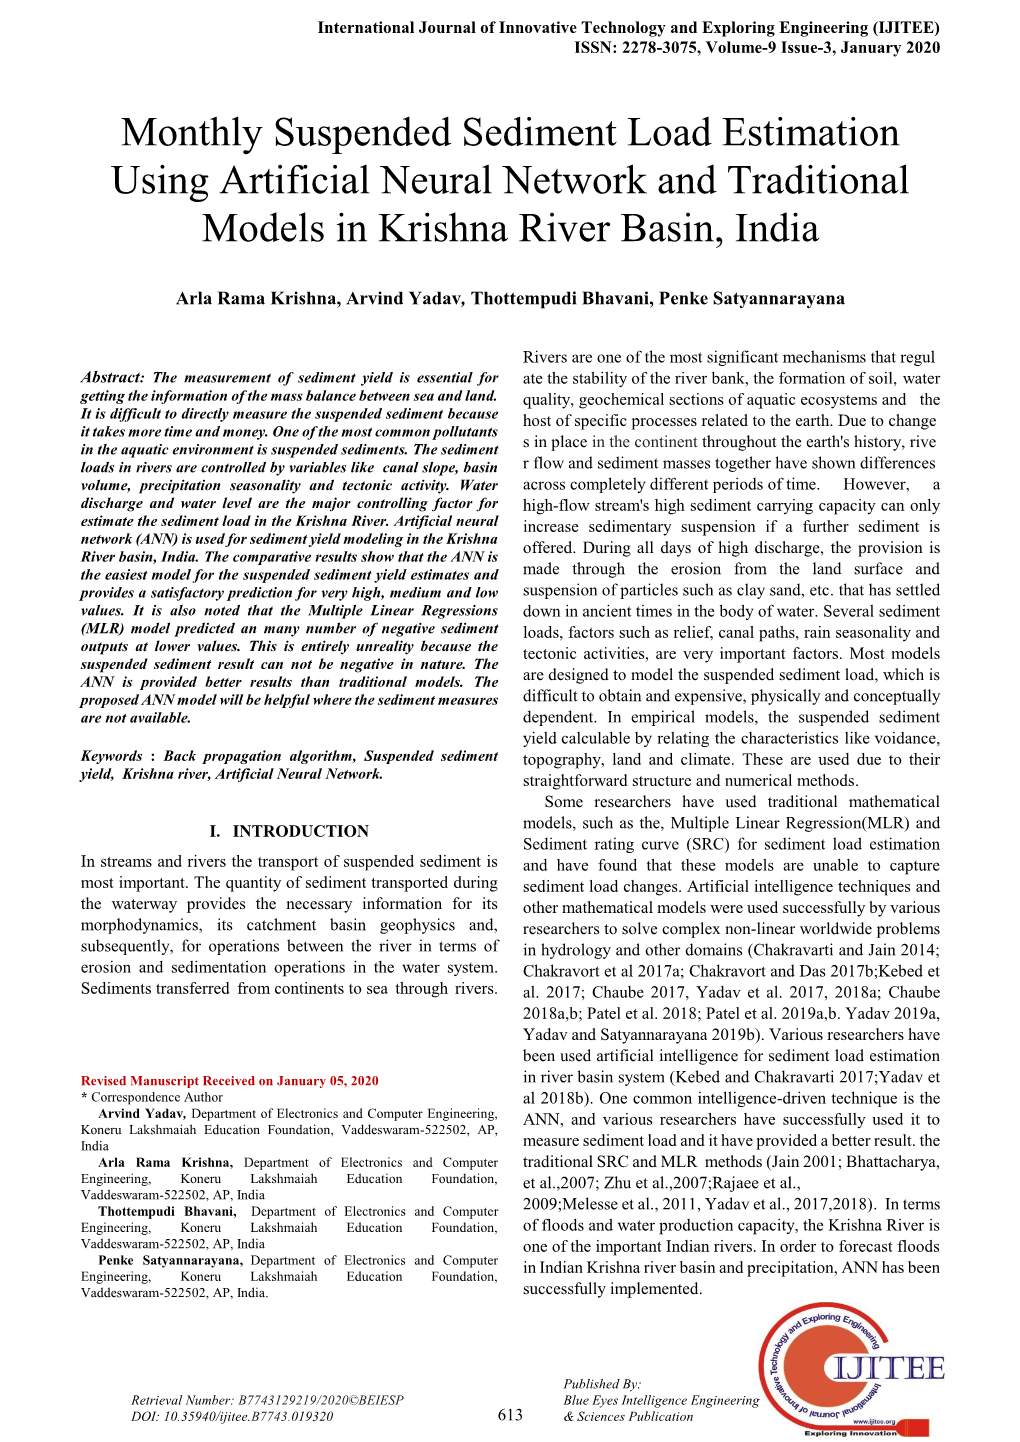 Monthly Suspended Sediment Load Estimation Using Artificial Neural Network and Traditional Models in Krishna River Basin, India